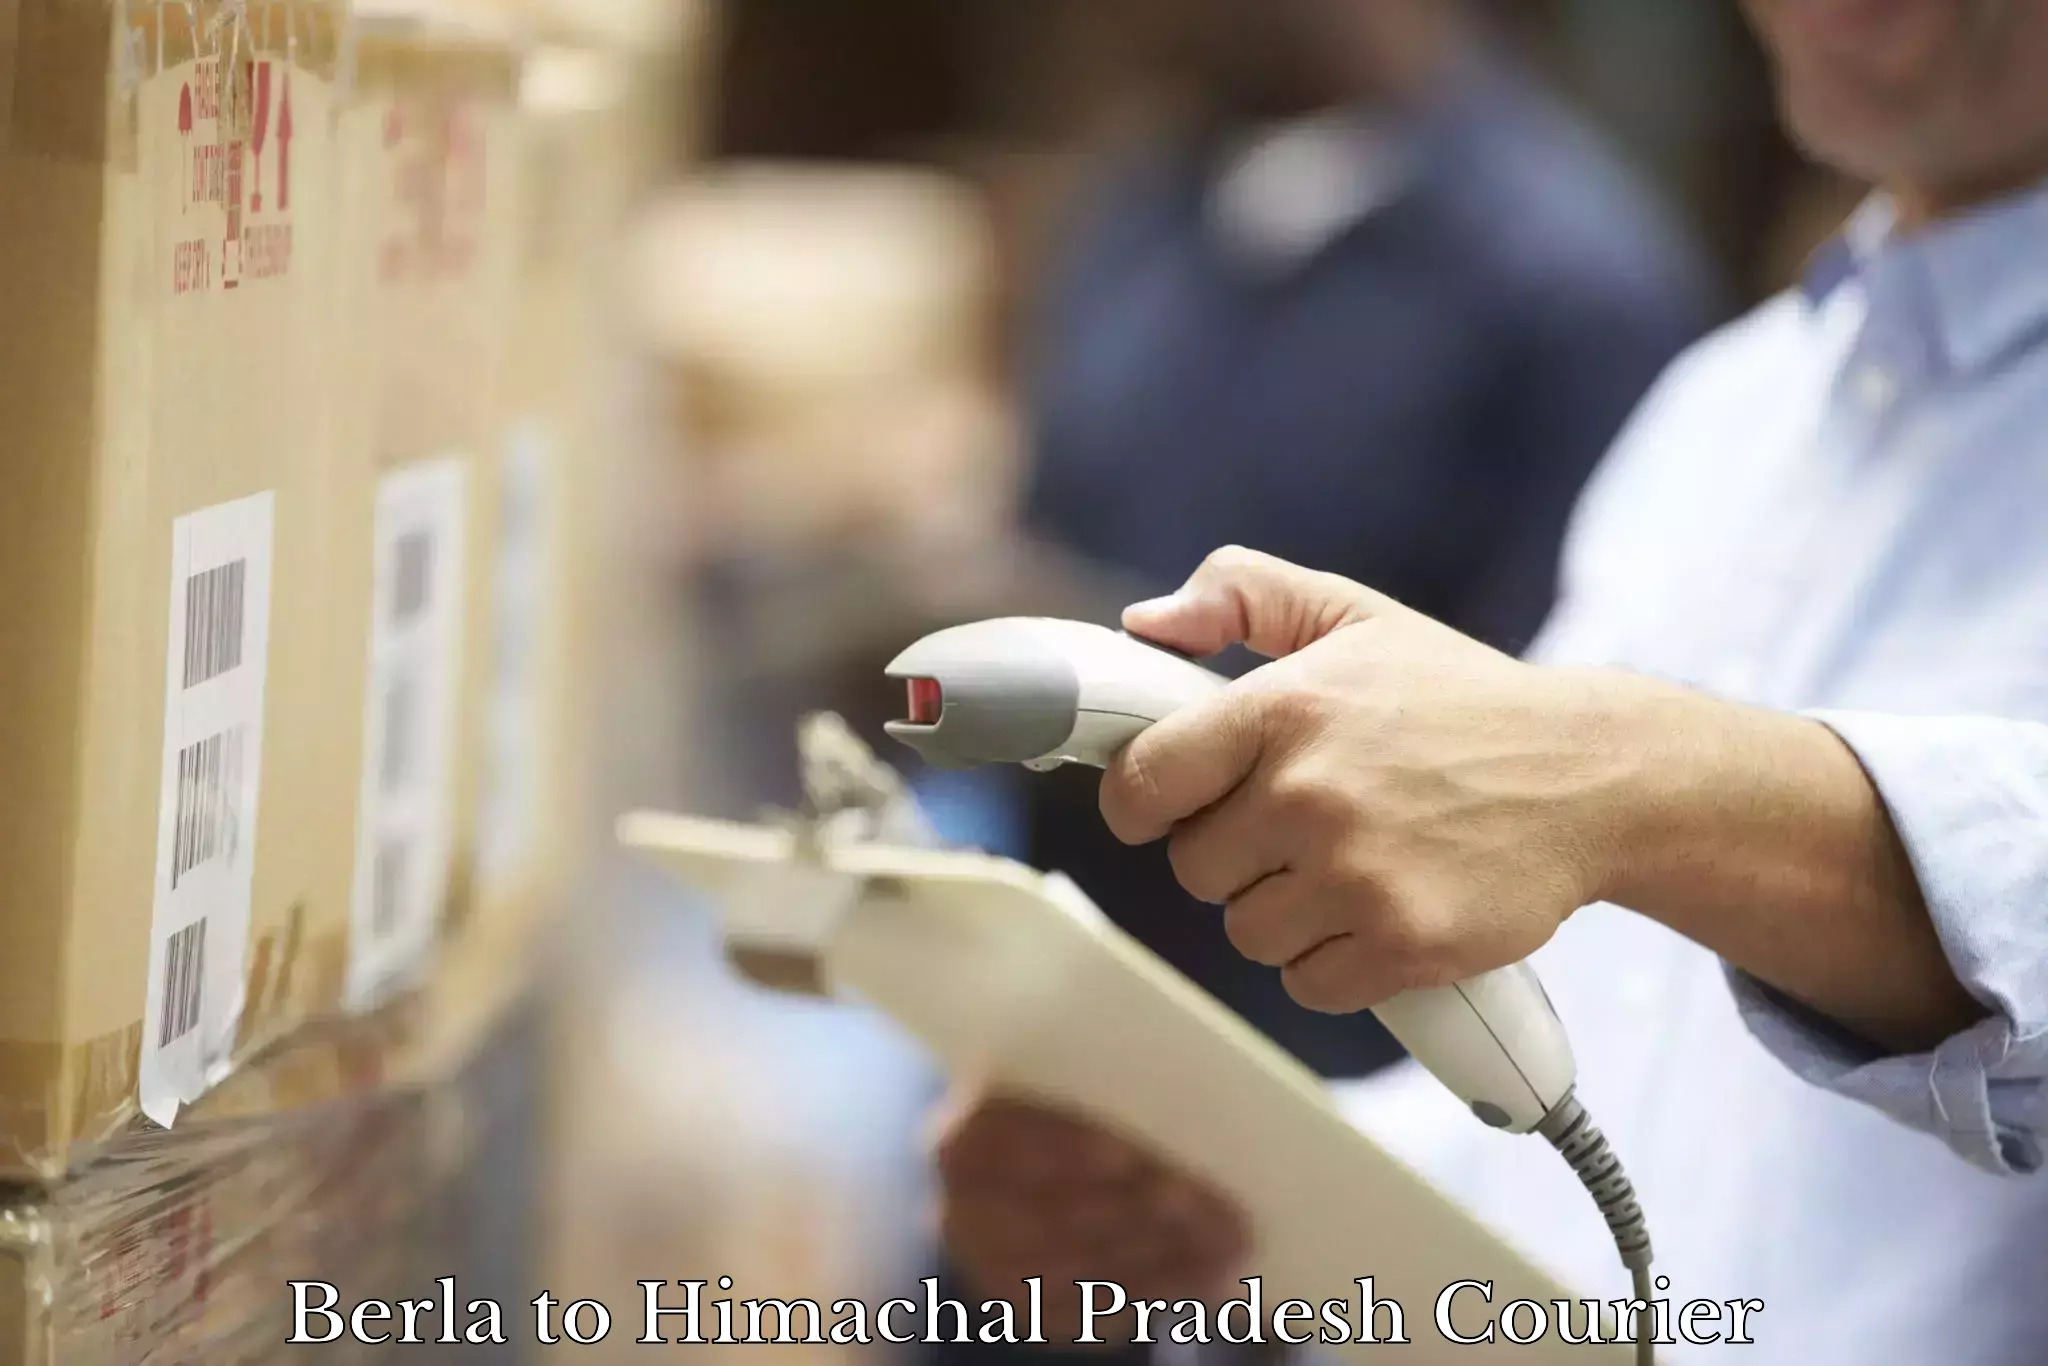 State-of-the-art courier technology Berla to Himachal Pradesh